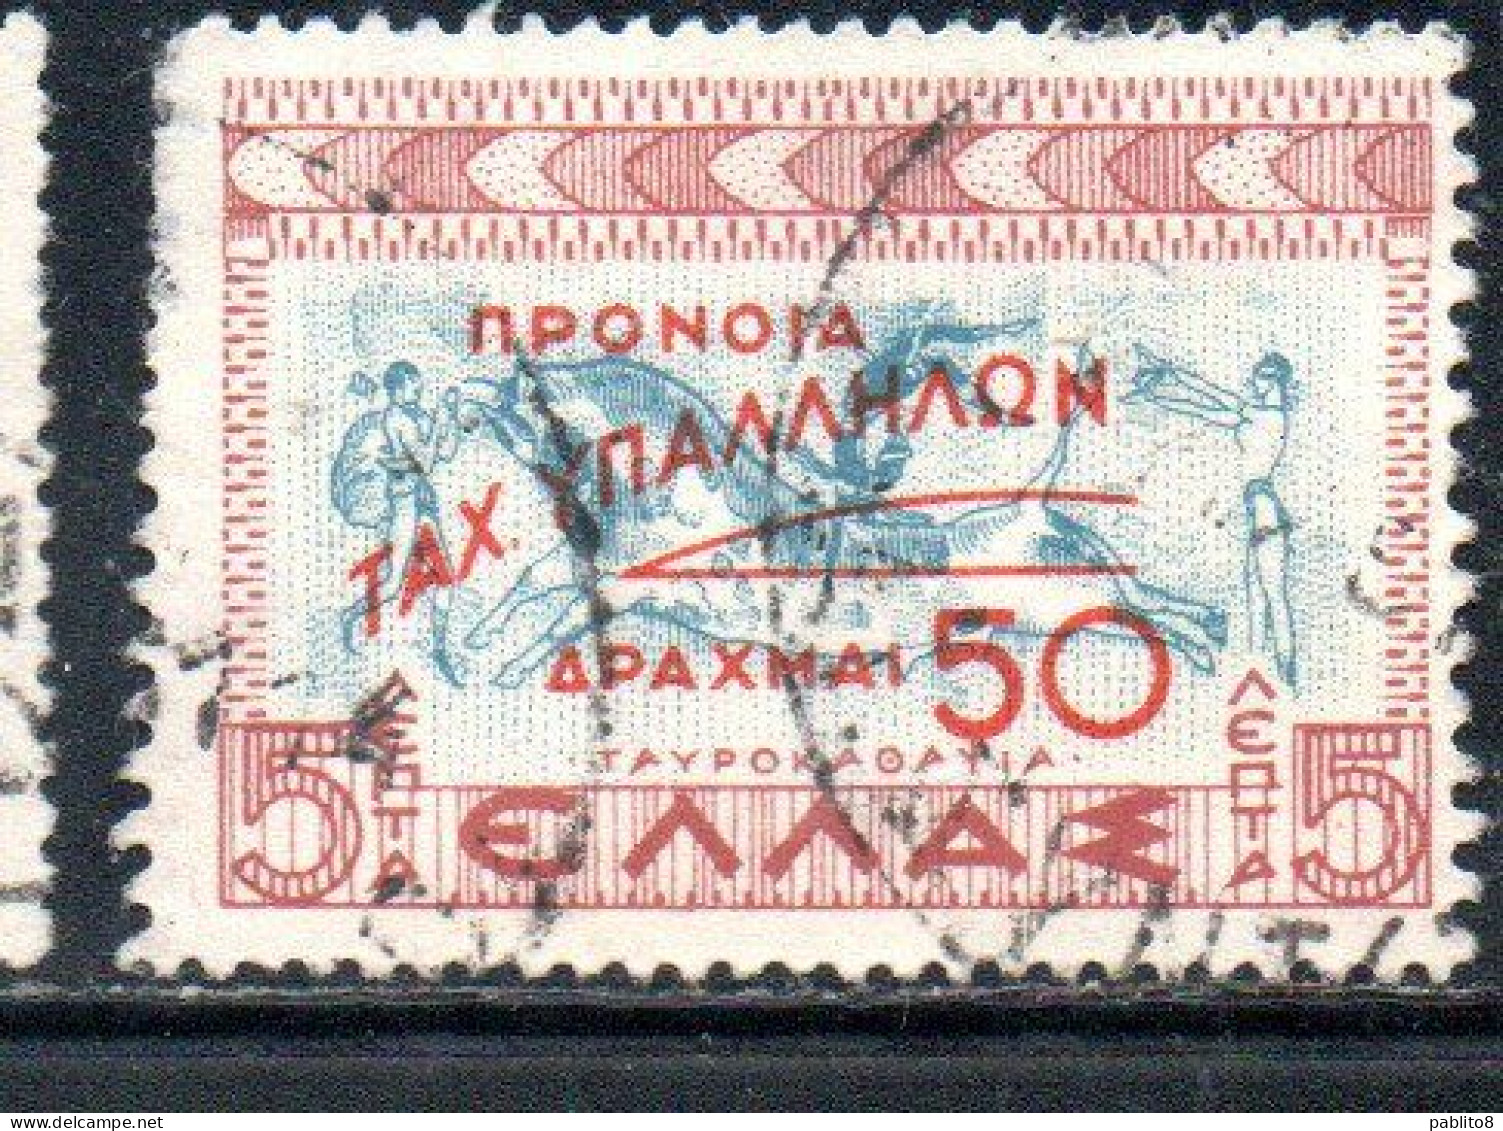 GREECE GRECIA ELLAS 1945 POSTAL TAX STAMPS WELFARE FUND SURCHARGED 50d On 5l USED USATO OBLITERE' - Fiscales